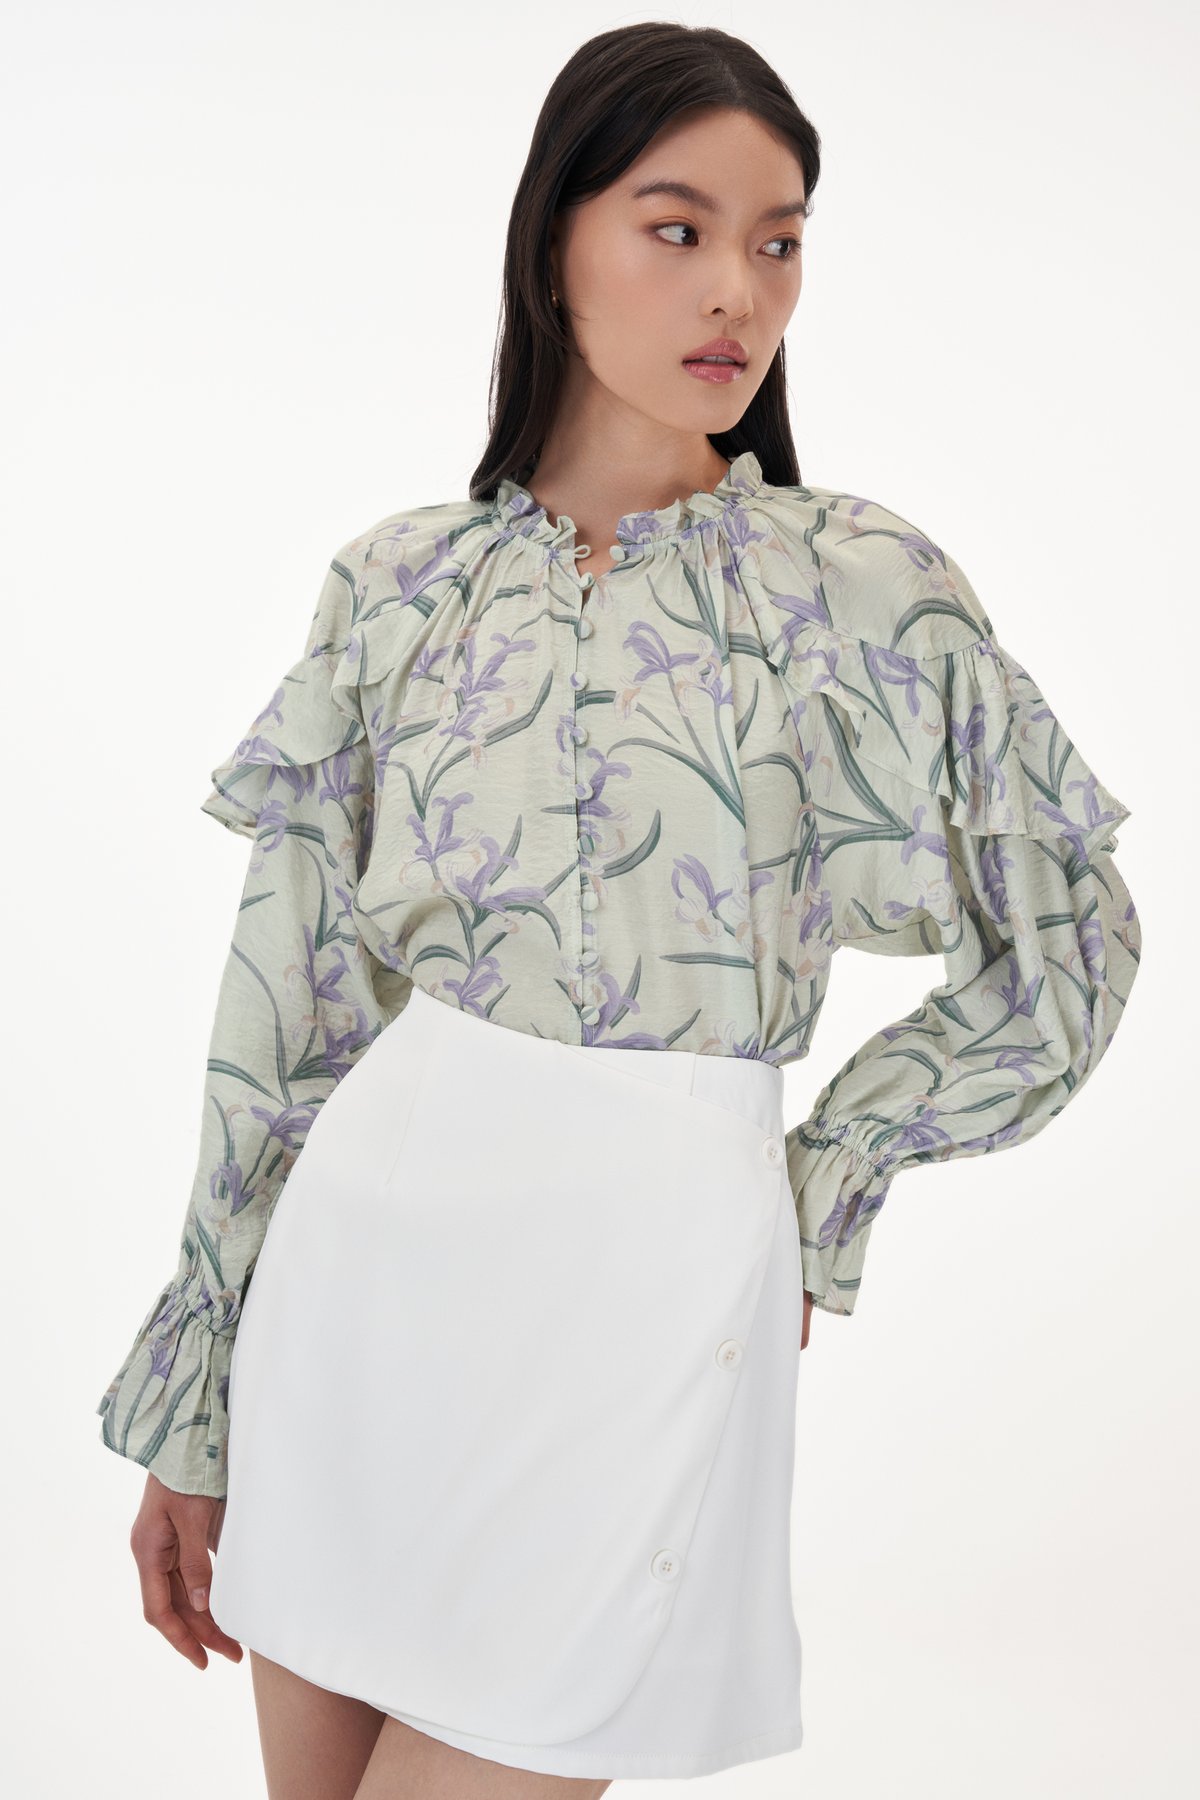 Shayla Ruffle Blouse in Sage and Lilac